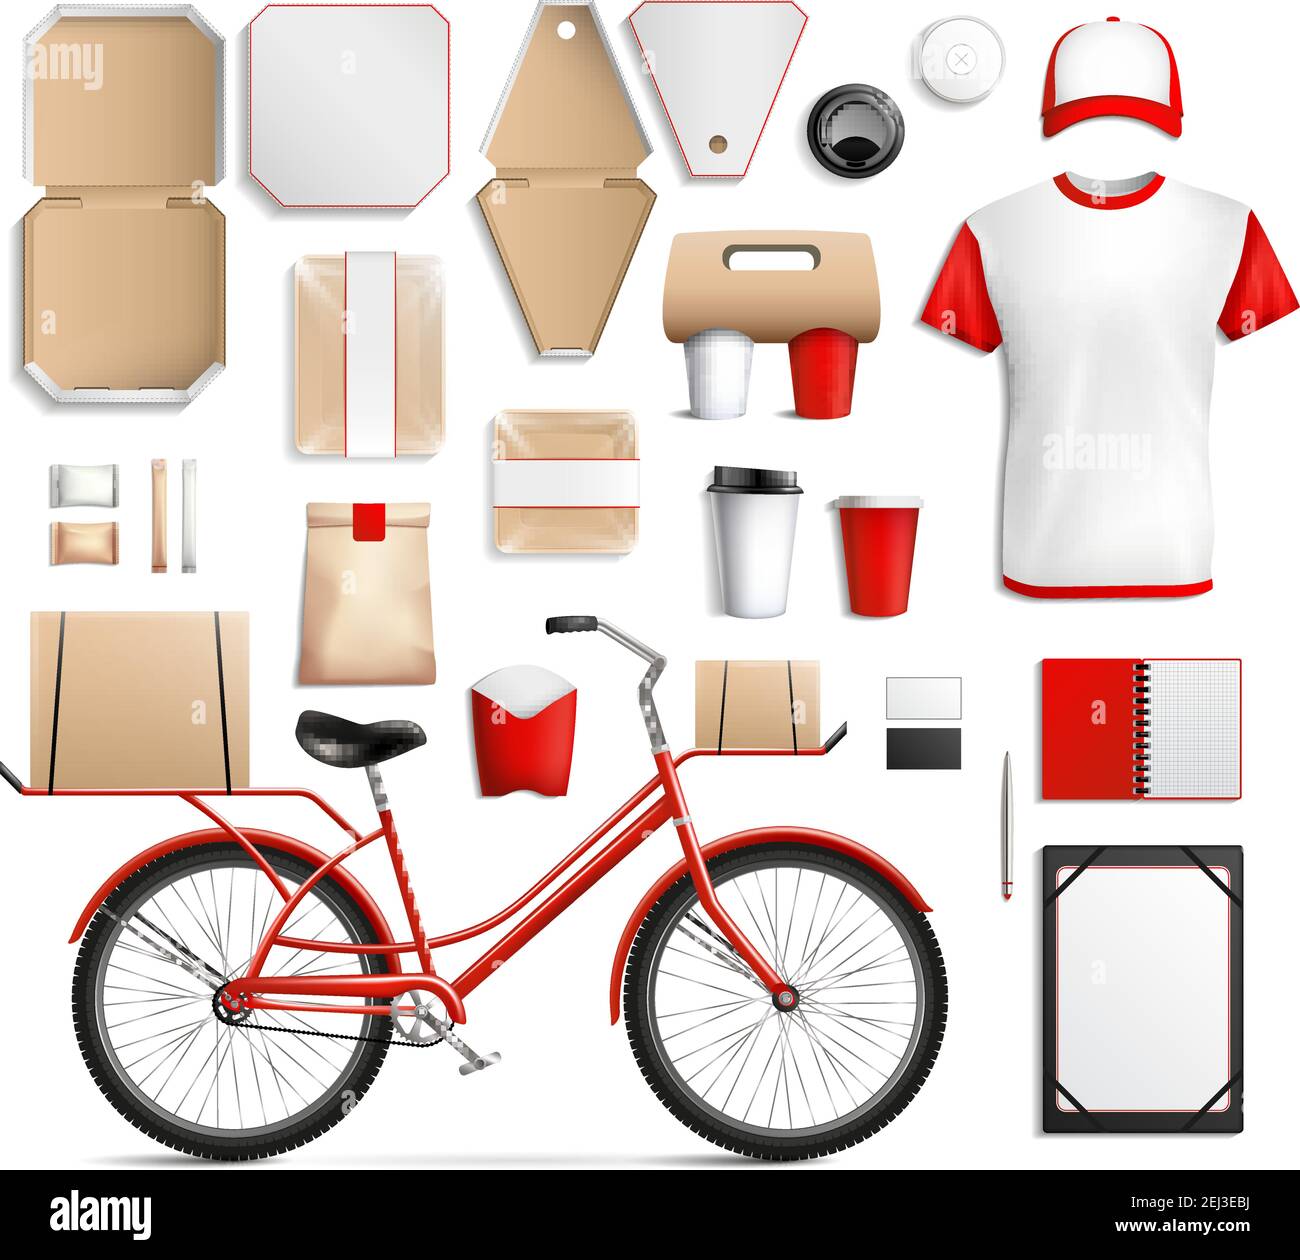 Packaging template set from cardboard and plastic for street food with bicycle for delivery isolated vector illustration Stock Vector